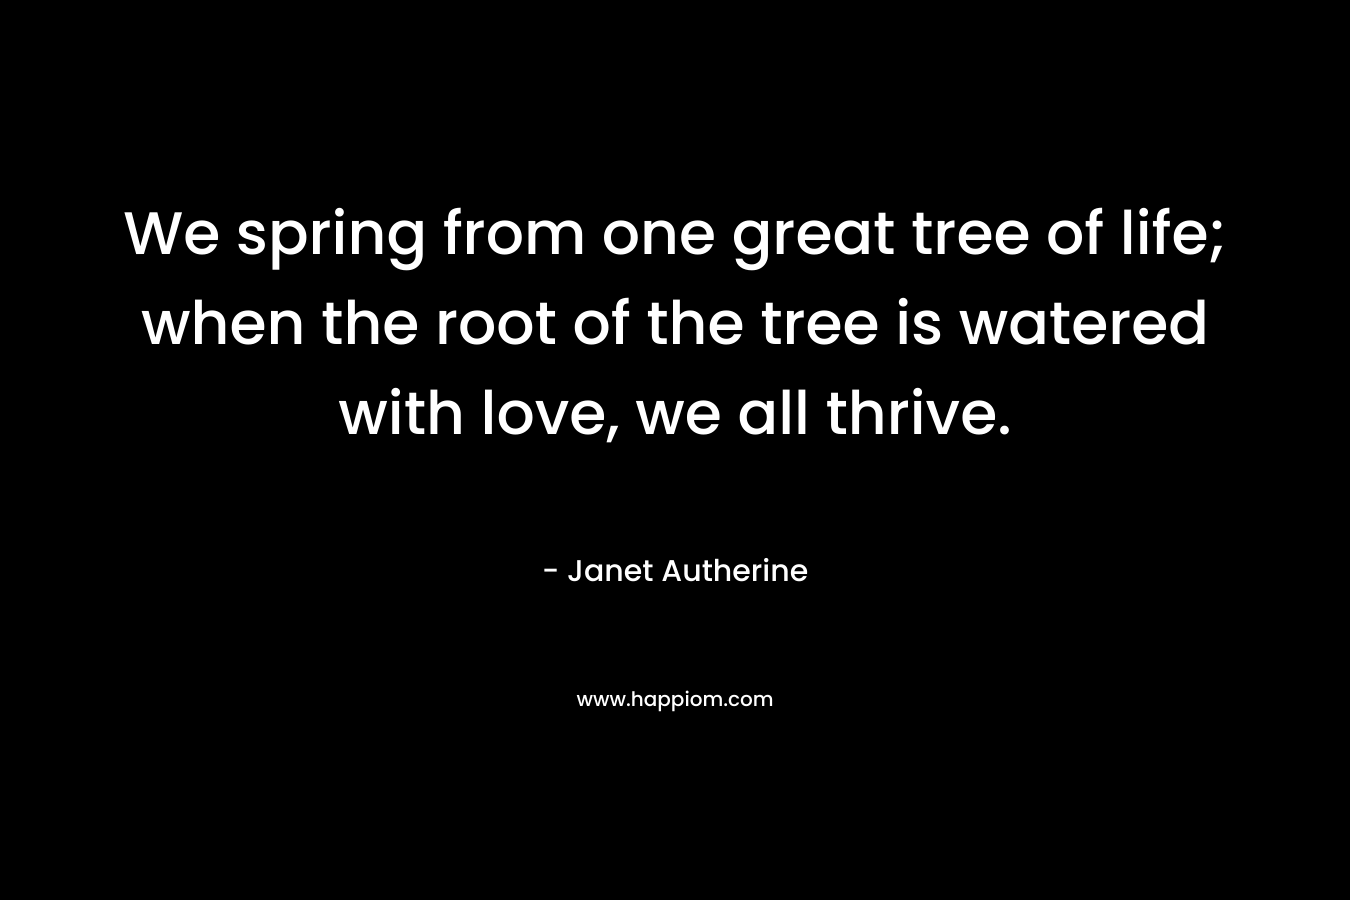 We spring from one great tree of life; when the root of the tree is watered with love, we all thrive.